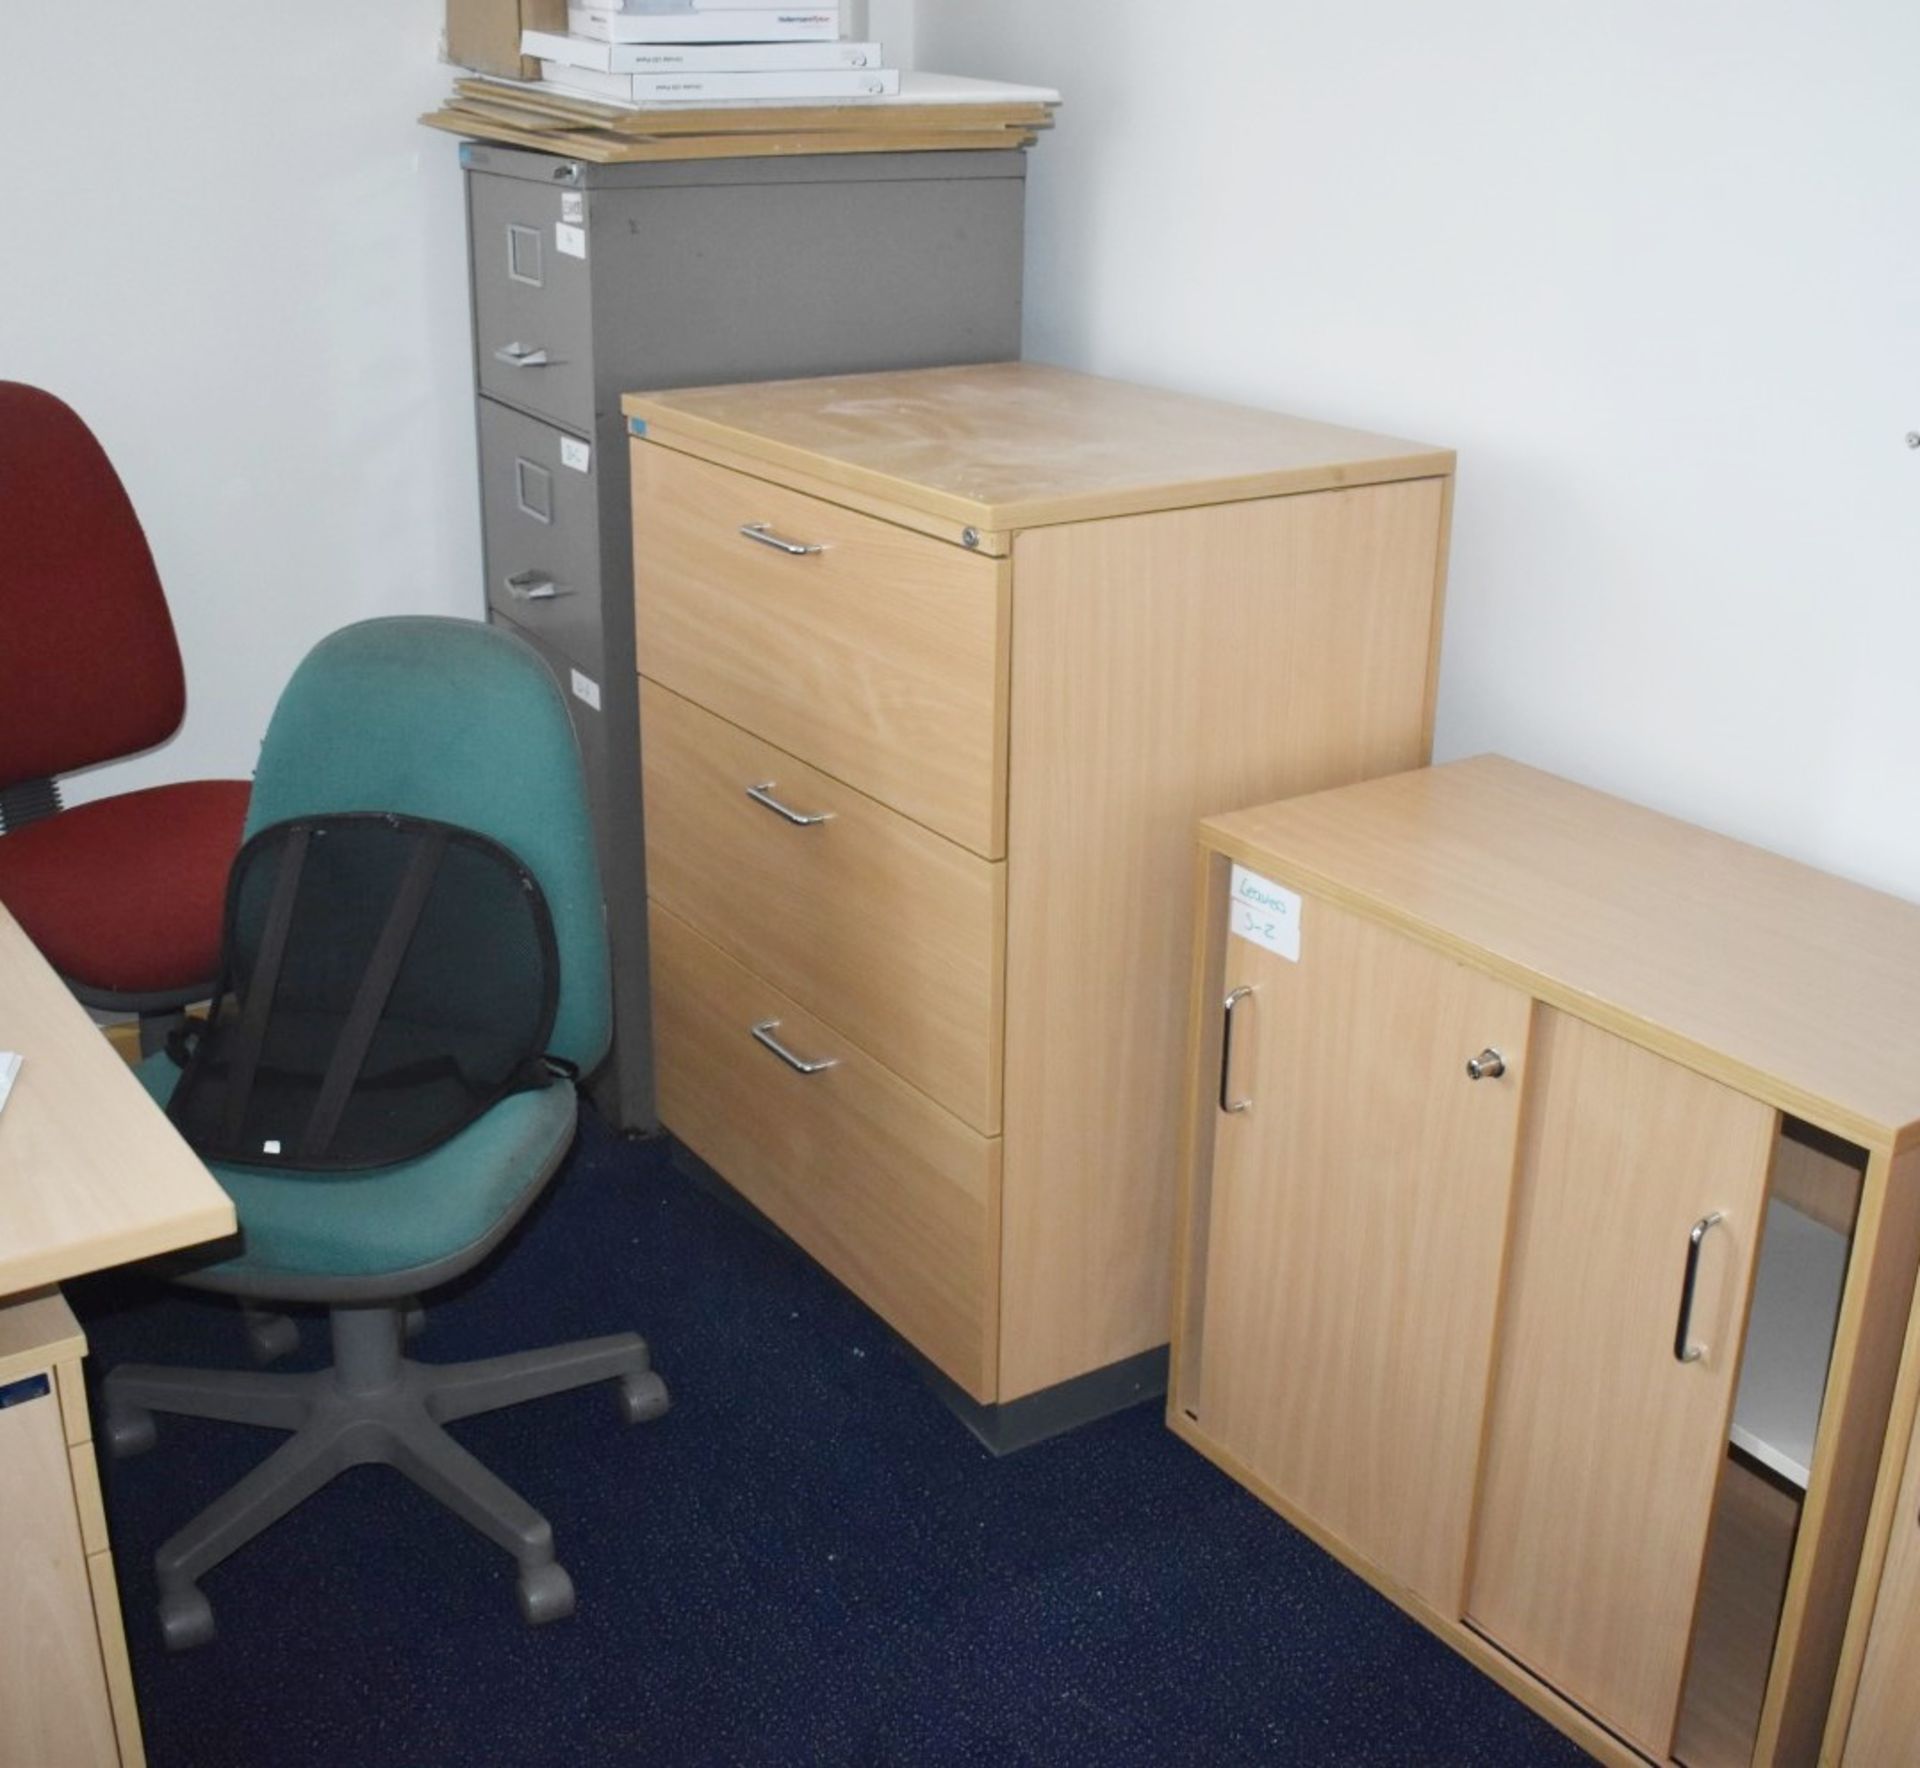 1 x Assorted Collection of Office Furniture - Includes 2 x 160cm Office Desks, 3 x Swivel Chairs, - Image 5 of 7